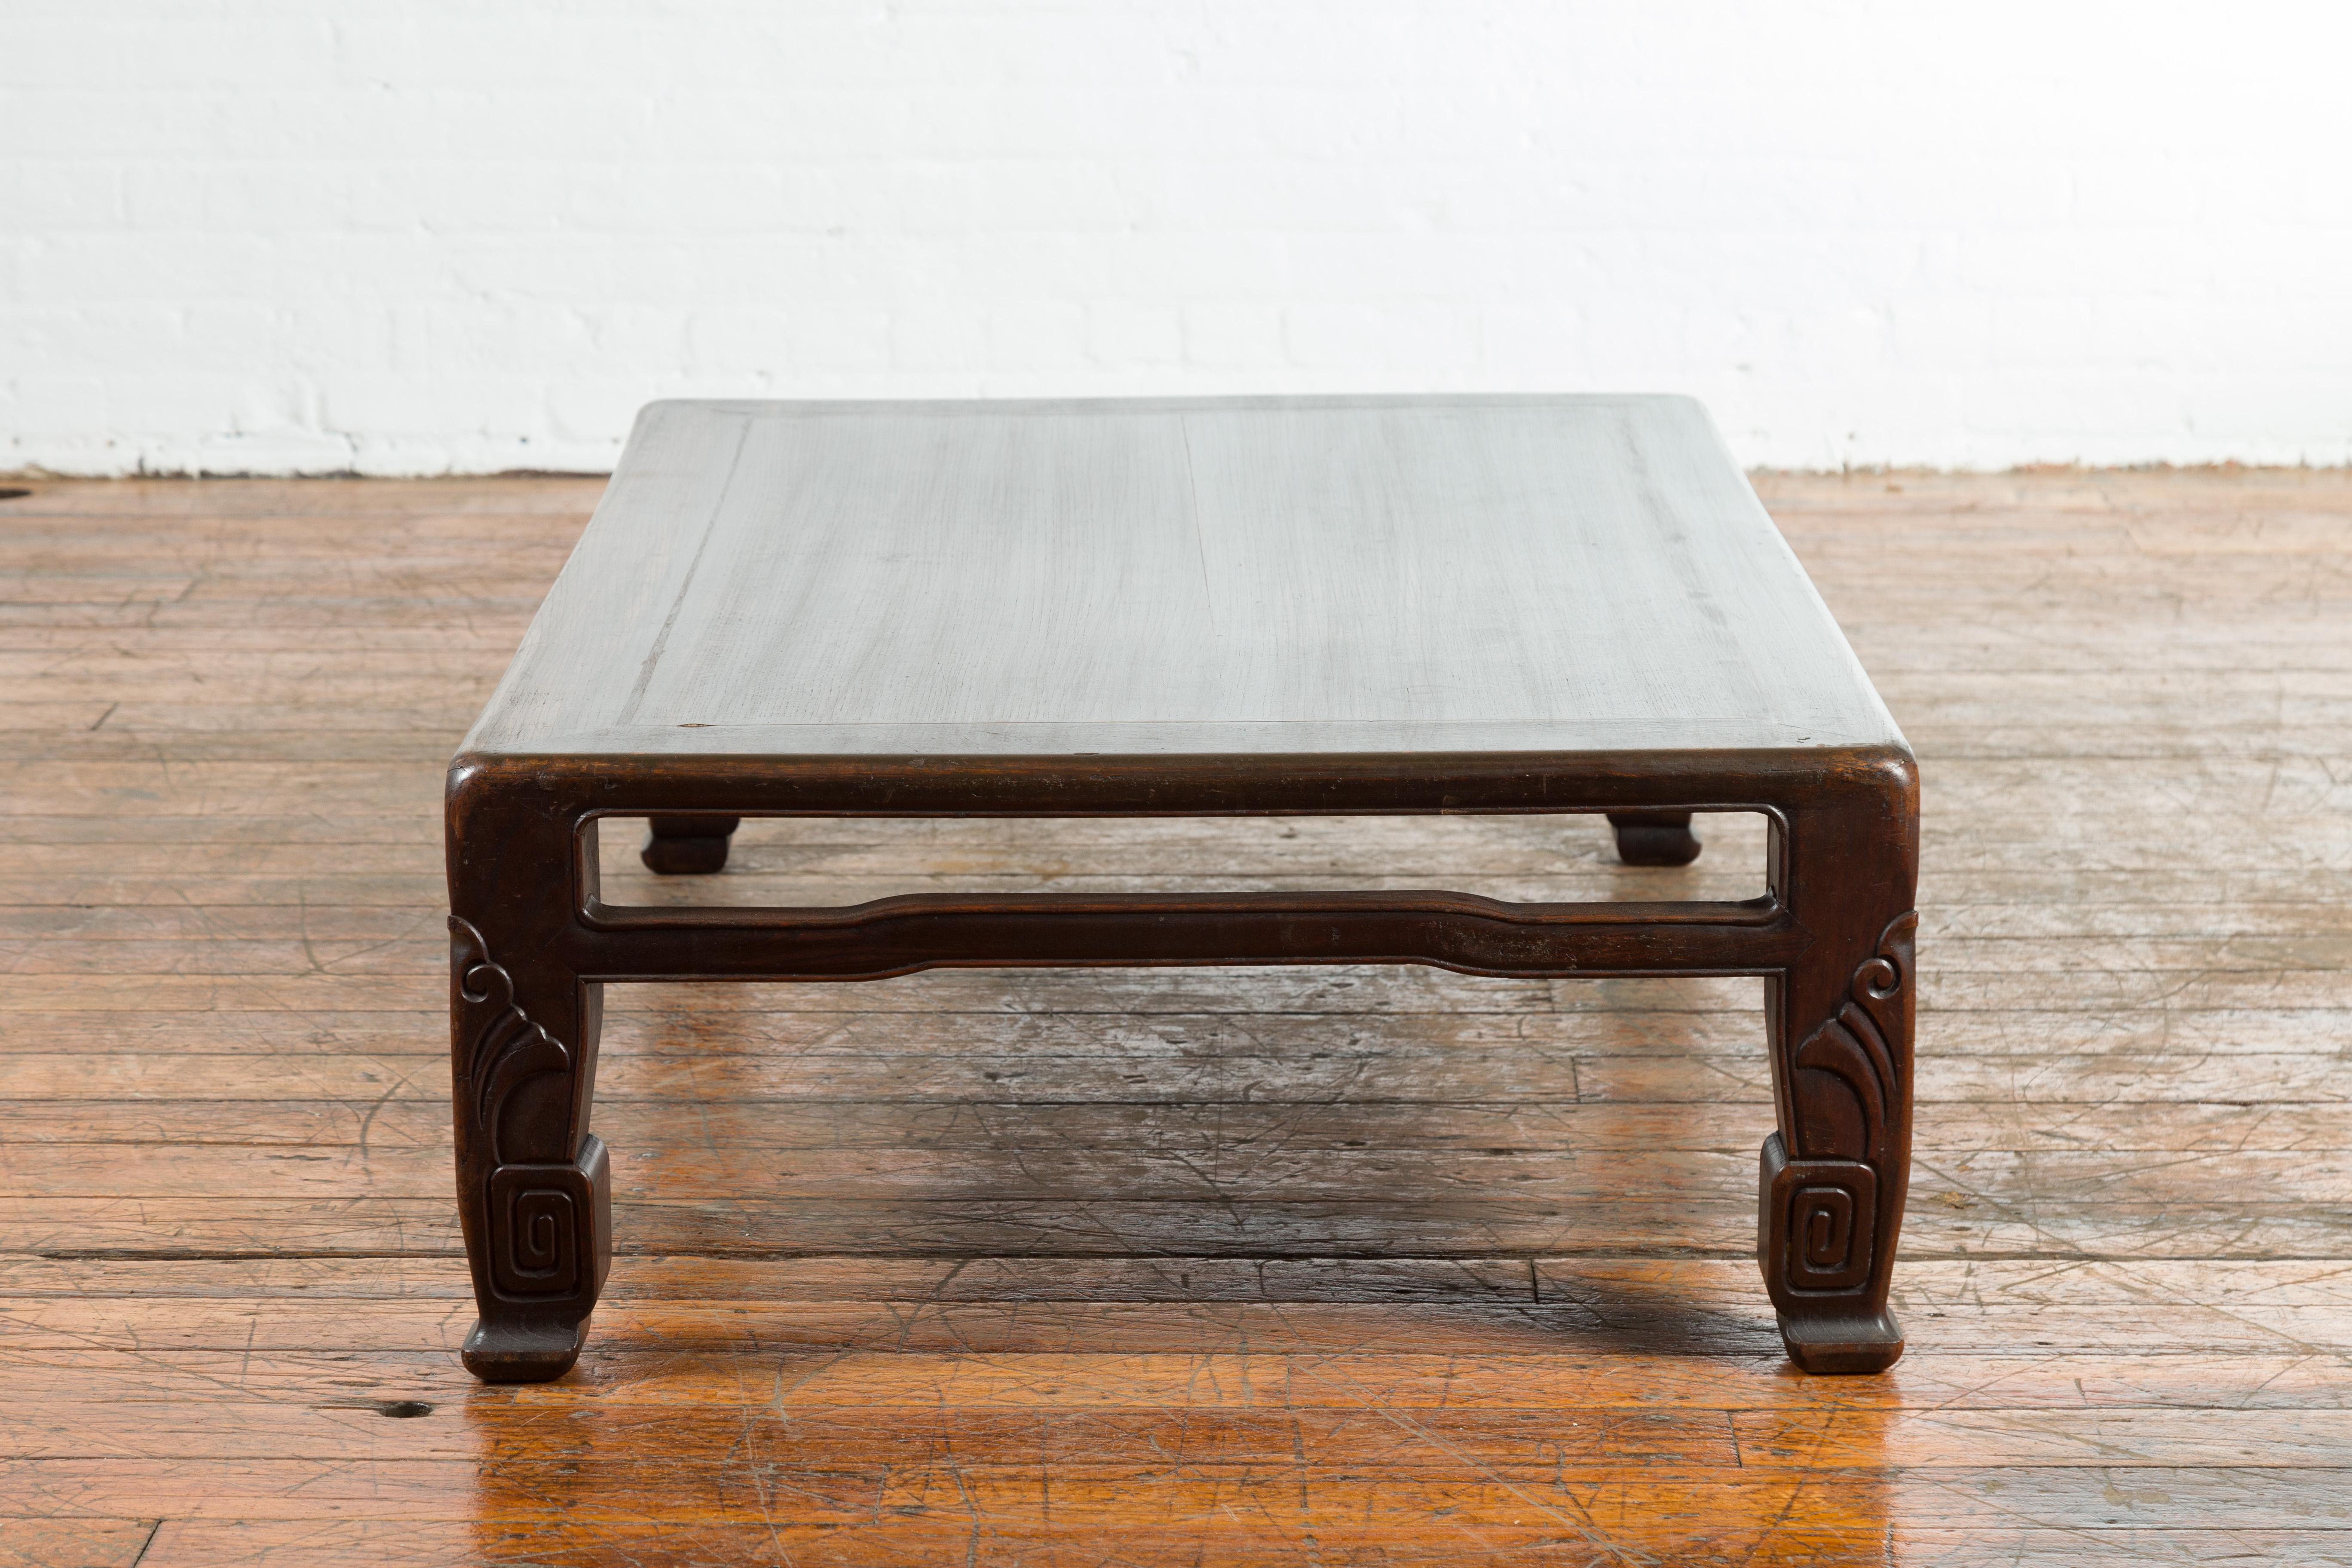 Chinese Antique Elmwood Coffee Table with Scrolling Feet and Humpback Stretchers For Sale 6